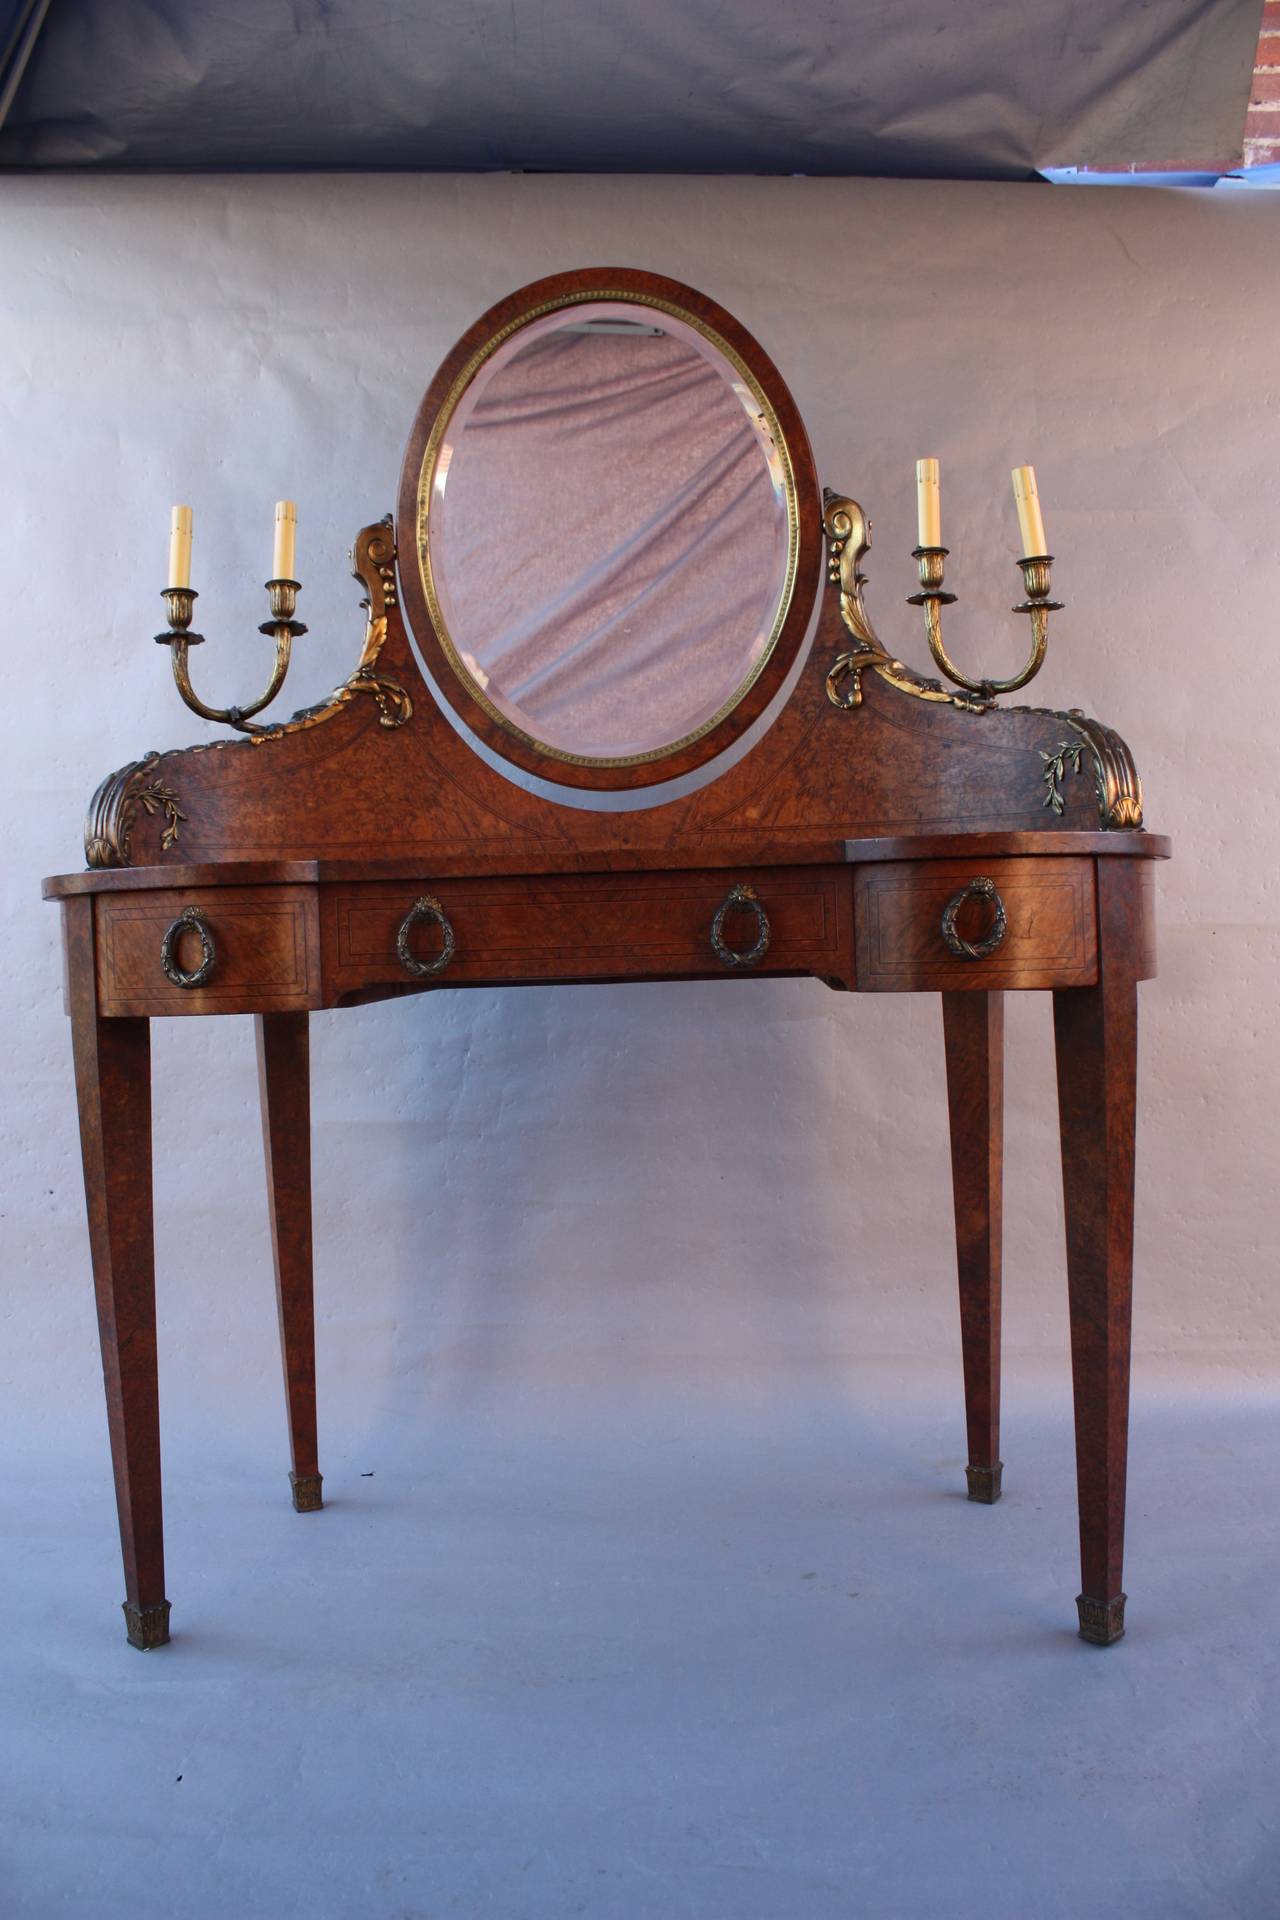 Vanity and mirror with beautiful burl wood and ormolu, circa 1910. The wood has a beautiful pattern and the two sconces were once electrified. Dimension: 45.5